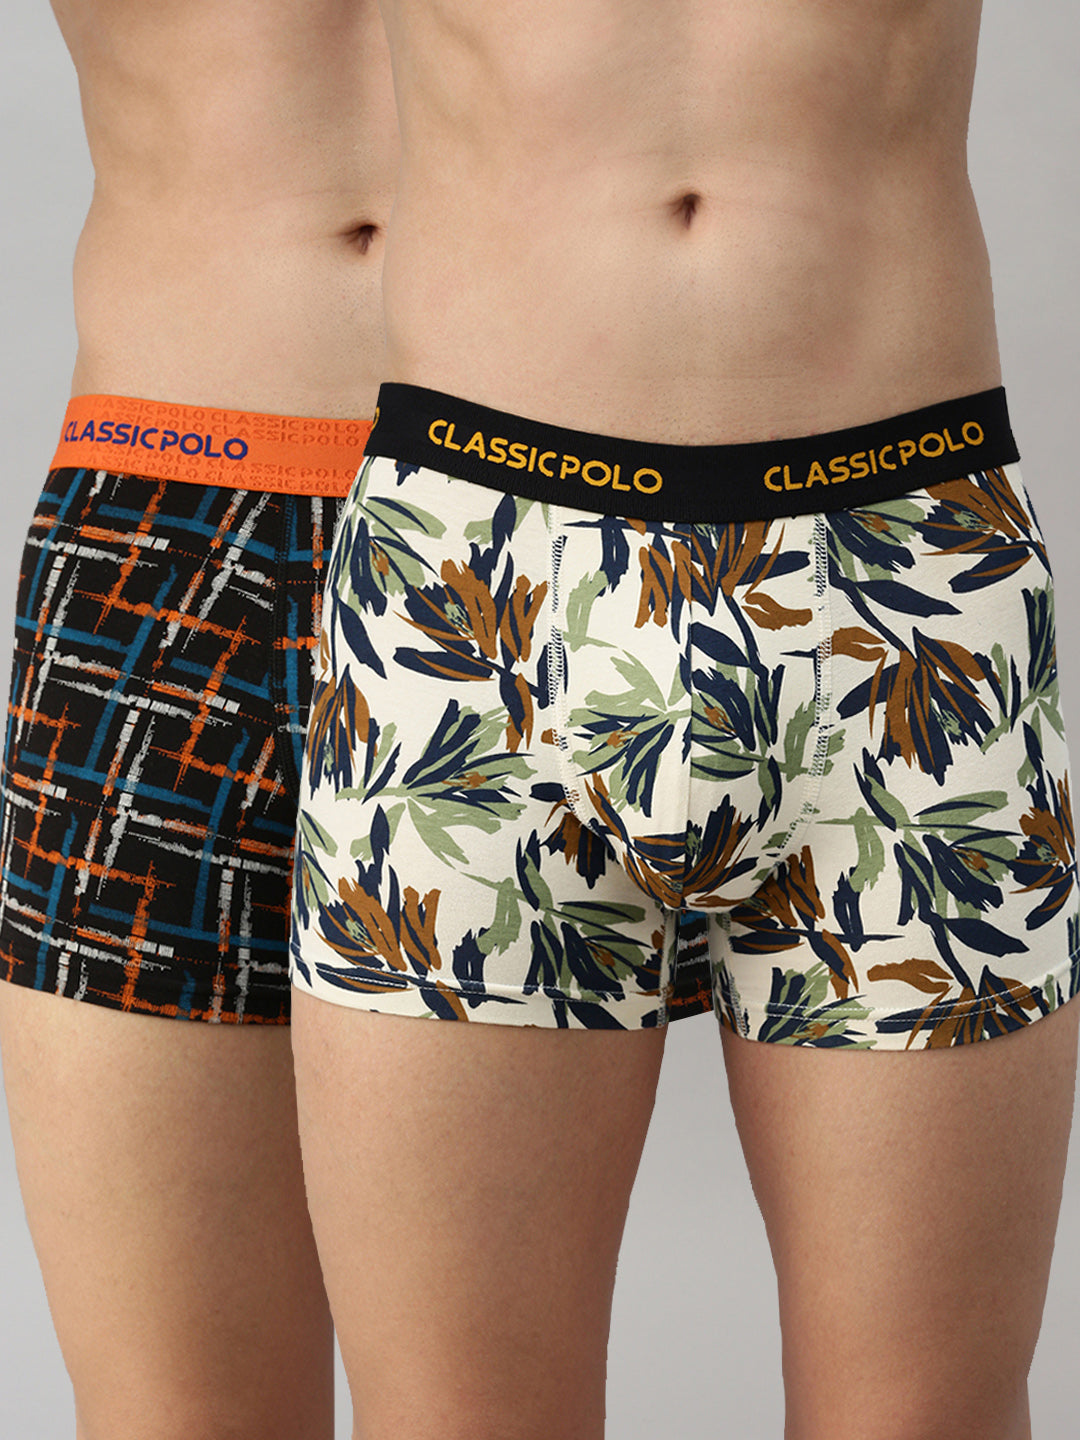 Classic Polo Men's Modal Printed Trunks | Glance - Black & Yellow (Pack of 2)